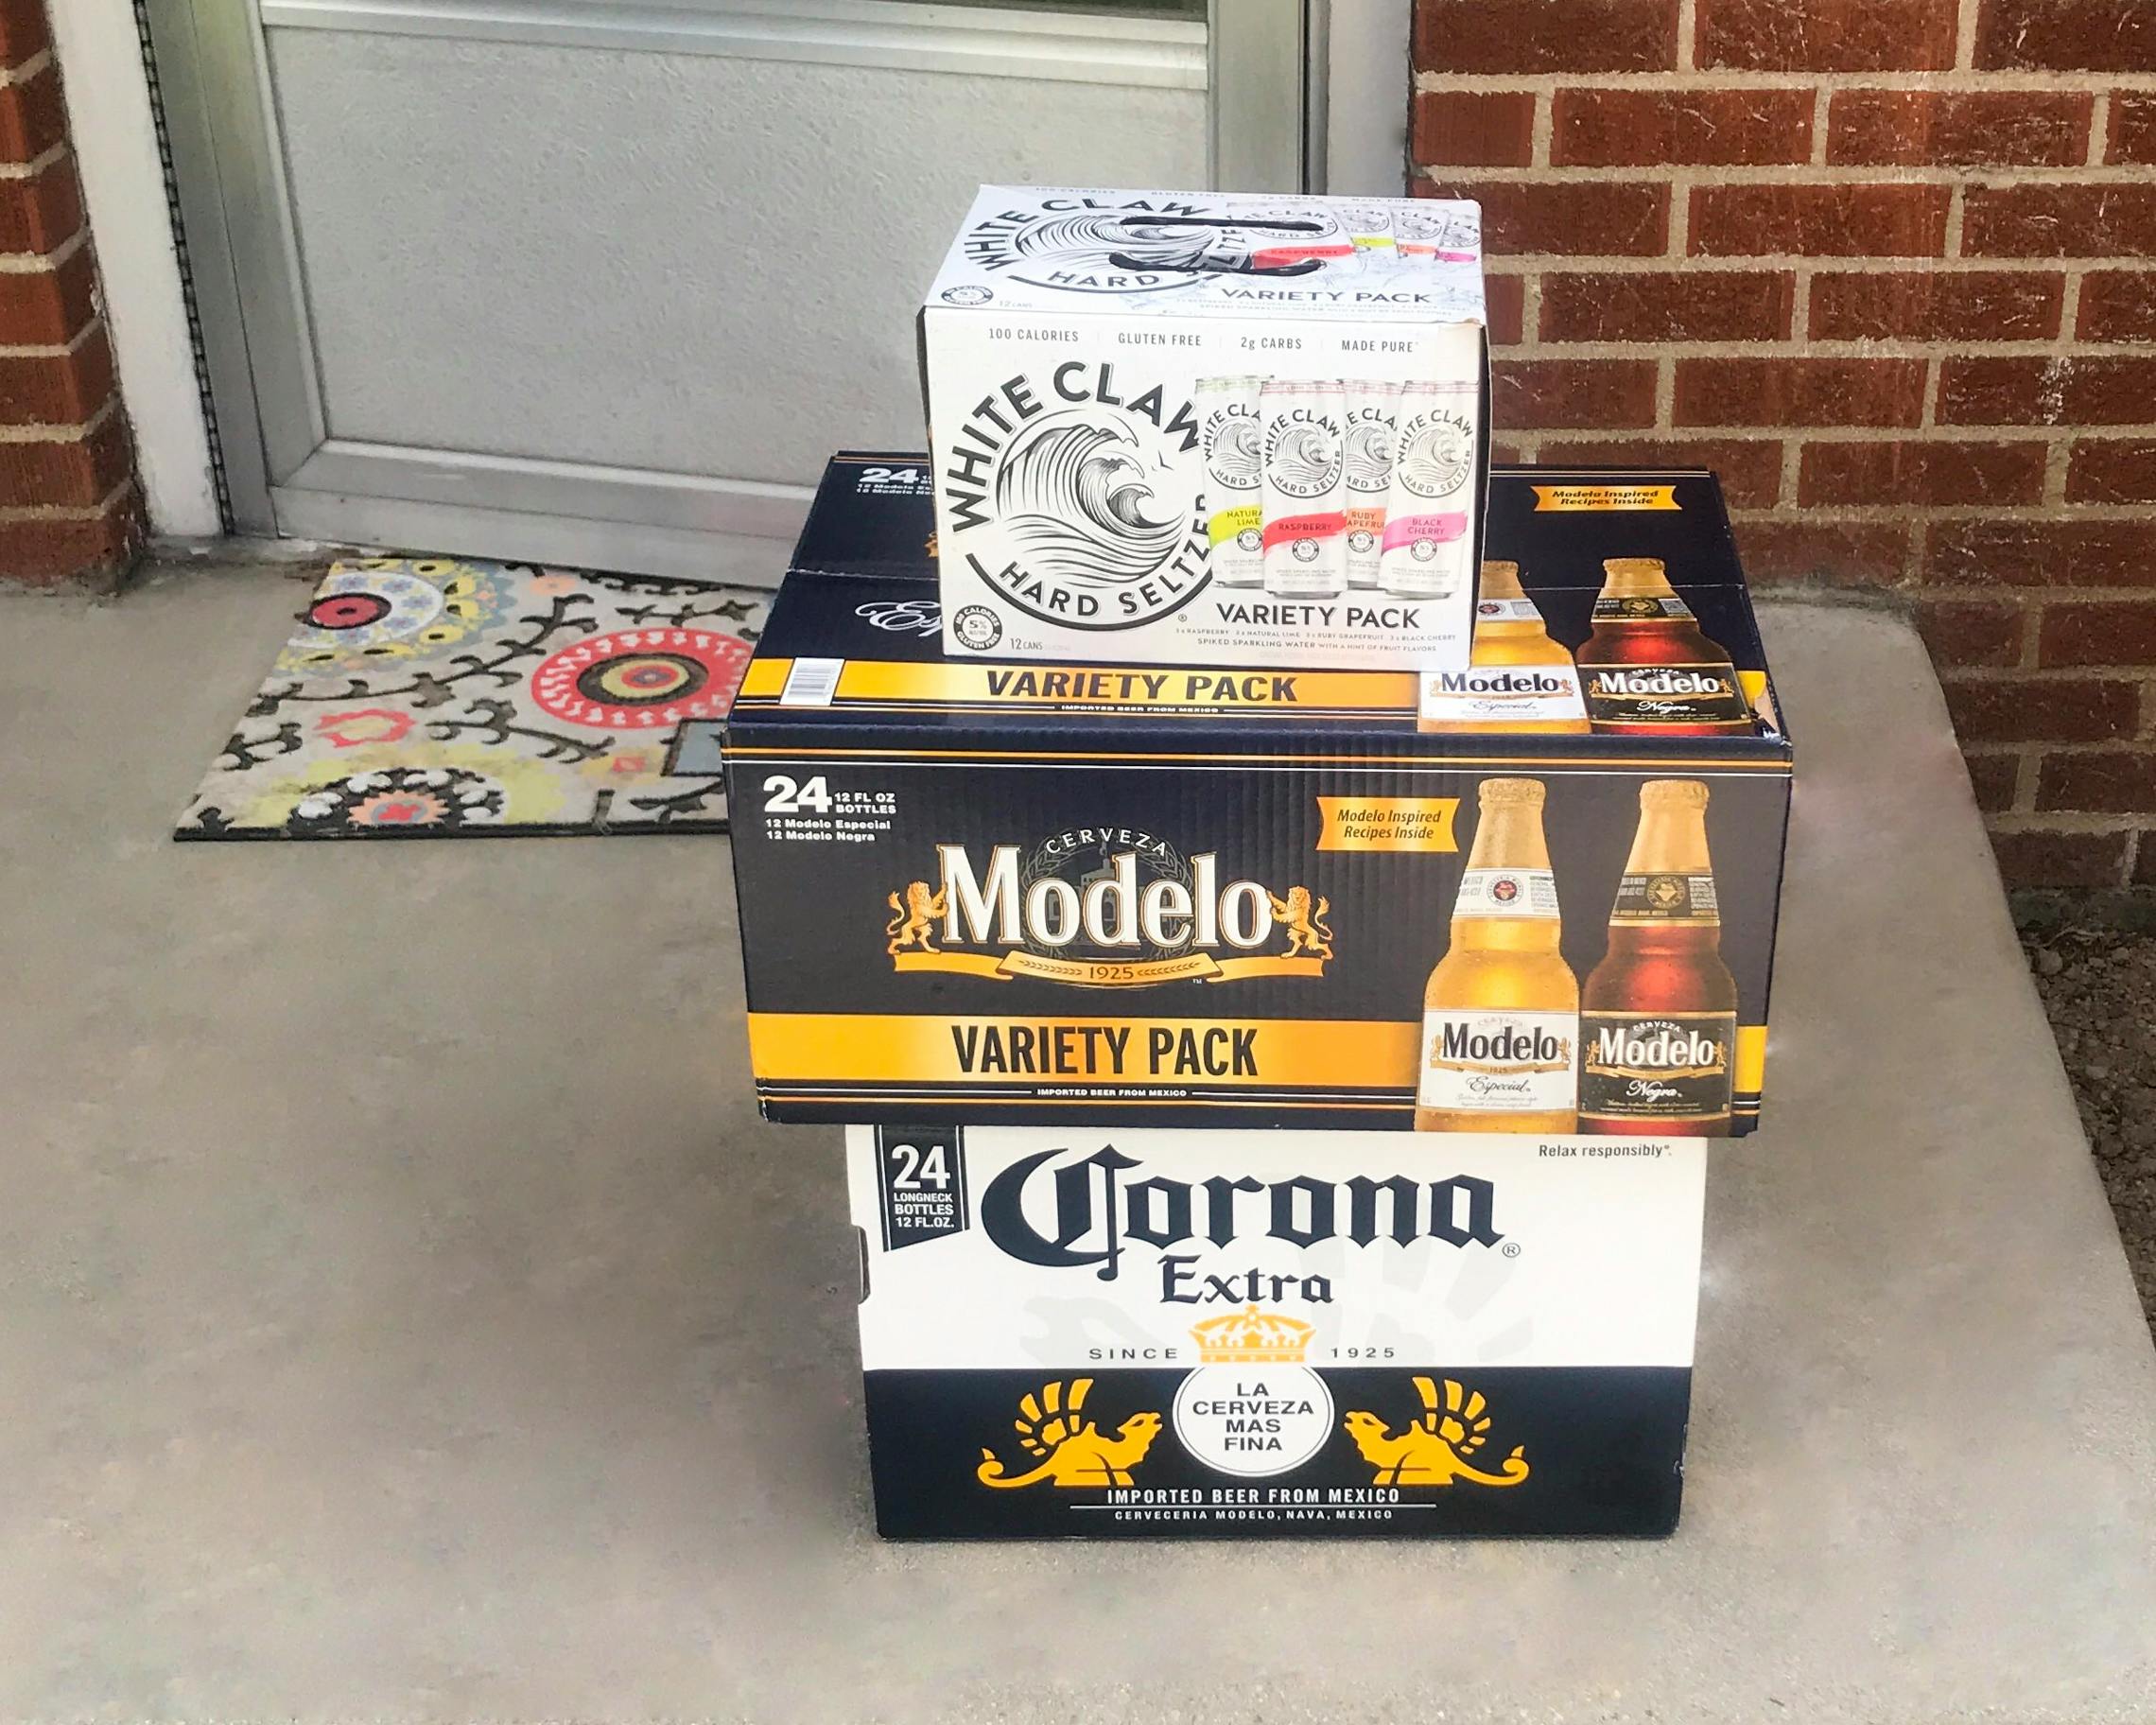 8 Ways to Get Beer Delivery to Your Doorstep - The Krazy Coupon Lady